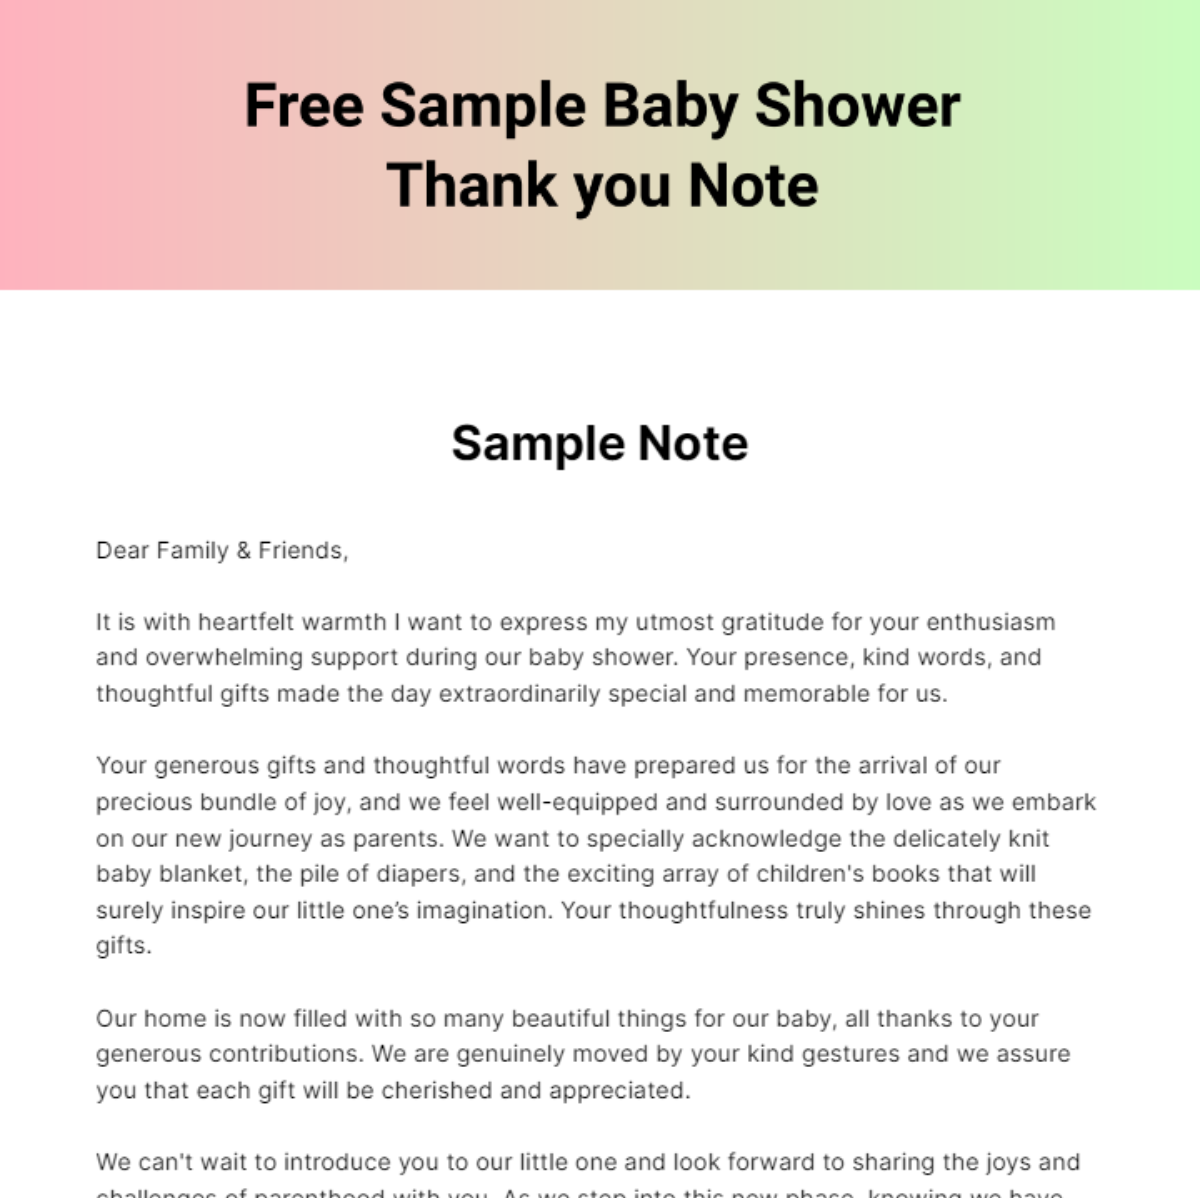 Sample Baby Shower Thank you Note Template